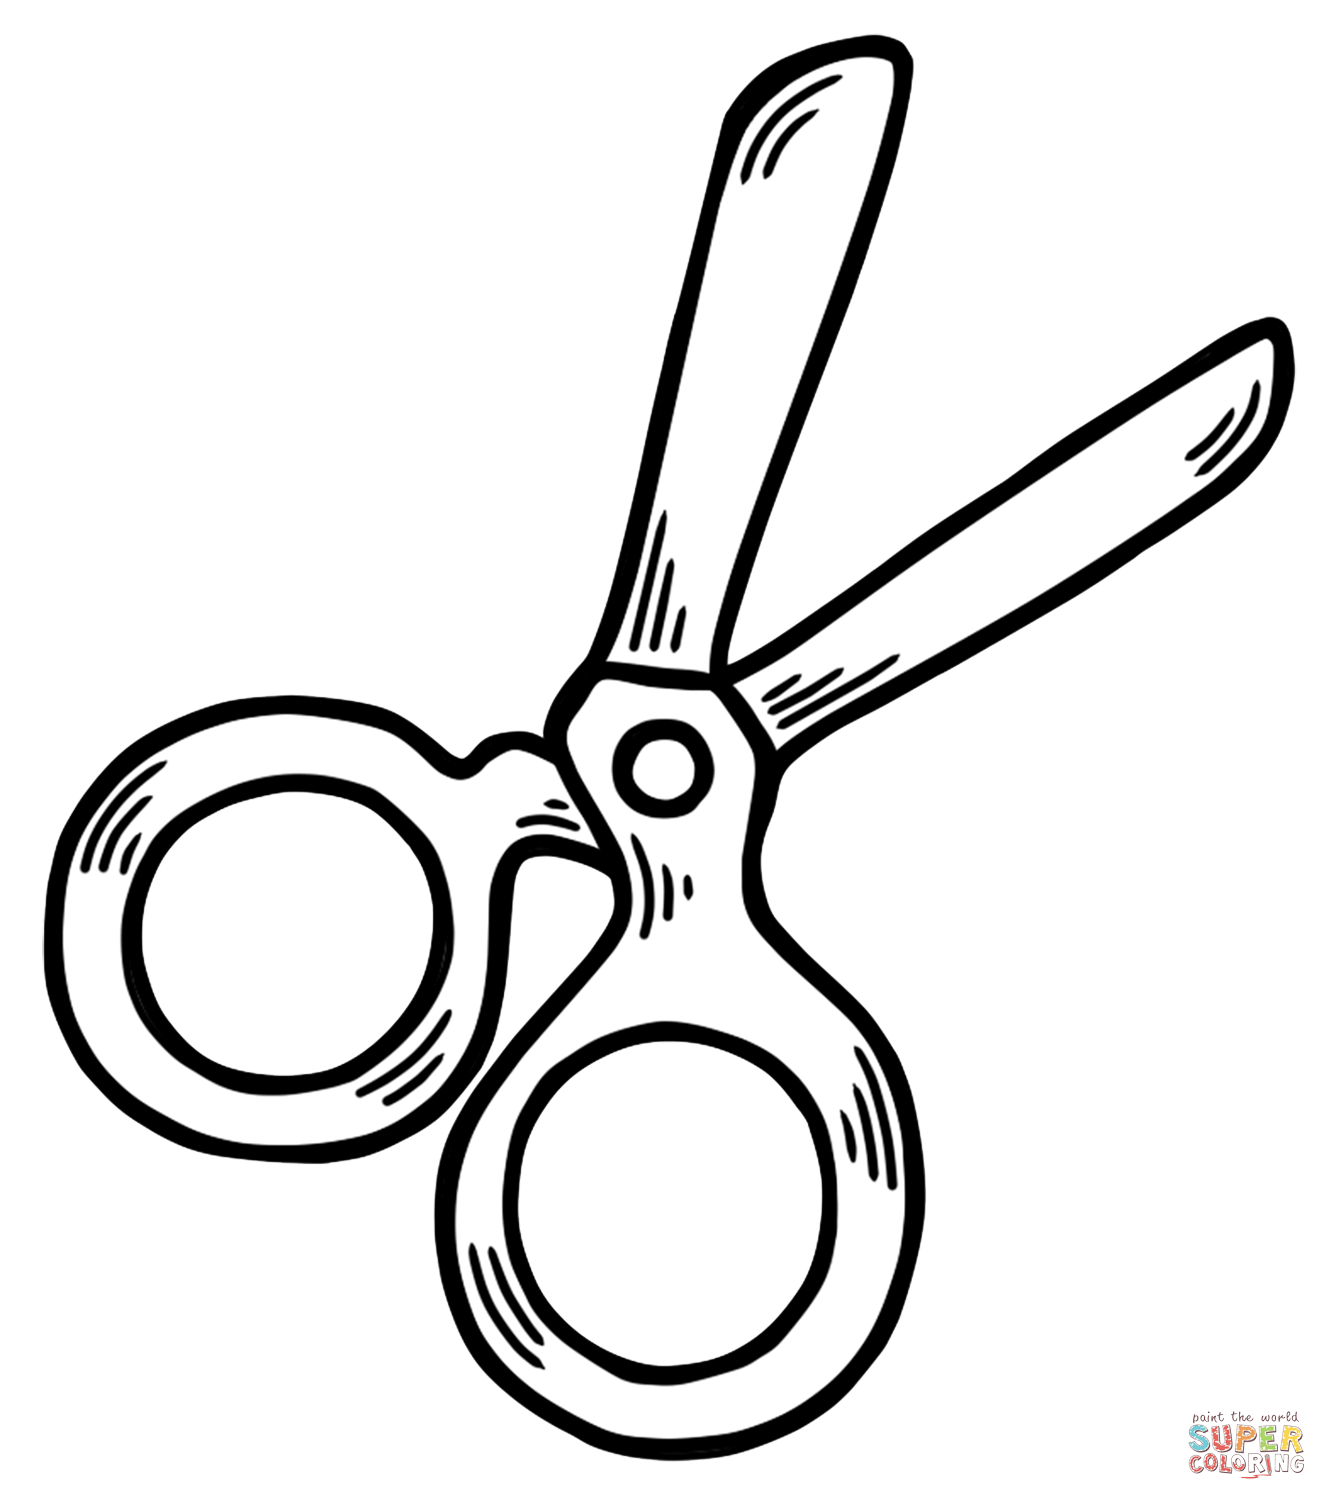 Scissors coloring page free printable coloring pages